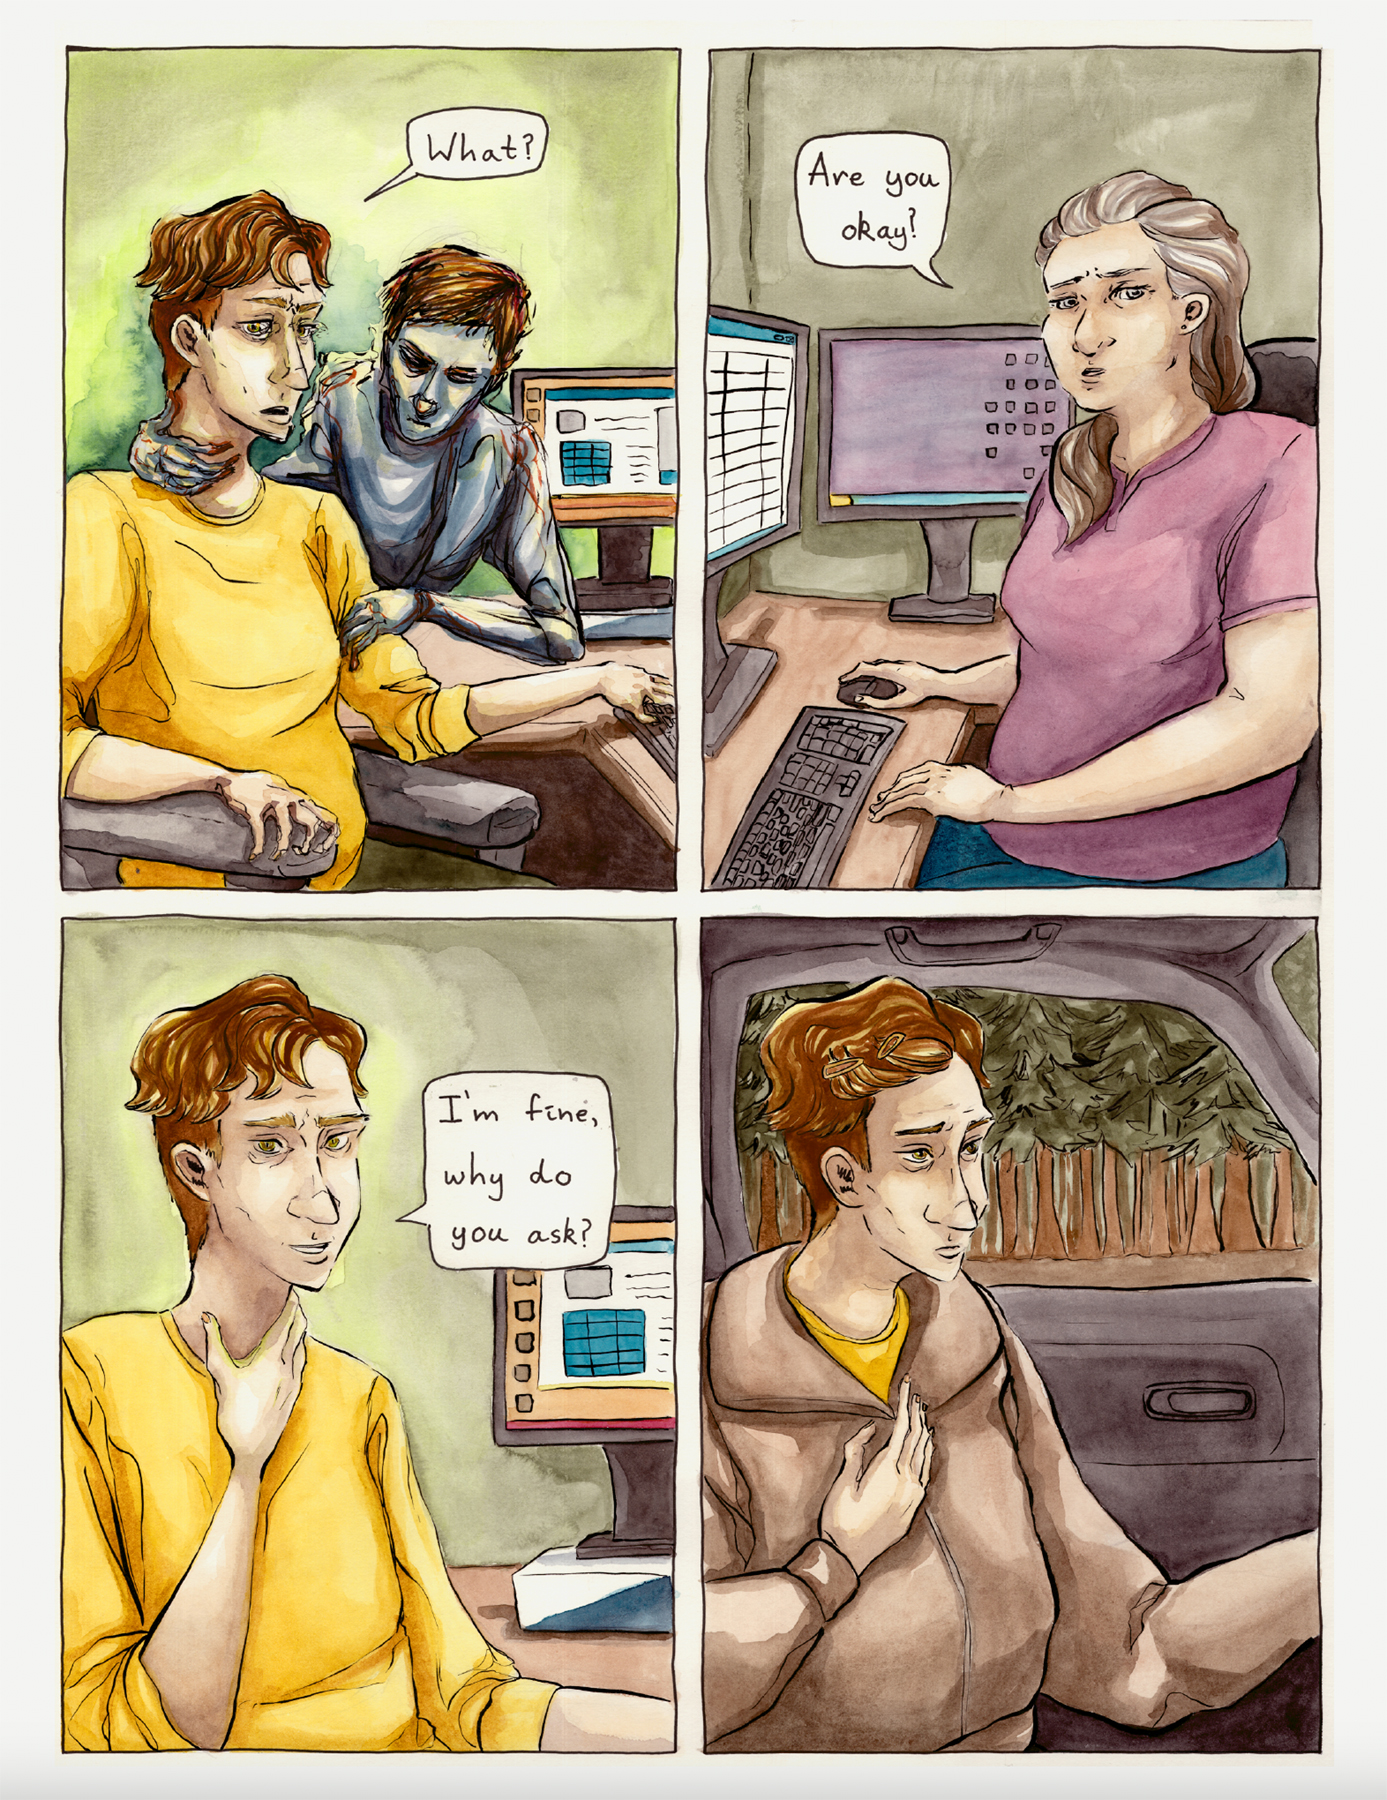 comic page from Against the Floor. Co-worker against asks if the main character is ok; they cannot see the figure standing over their shoulder. Image courtesy of Daniell Stromanthe